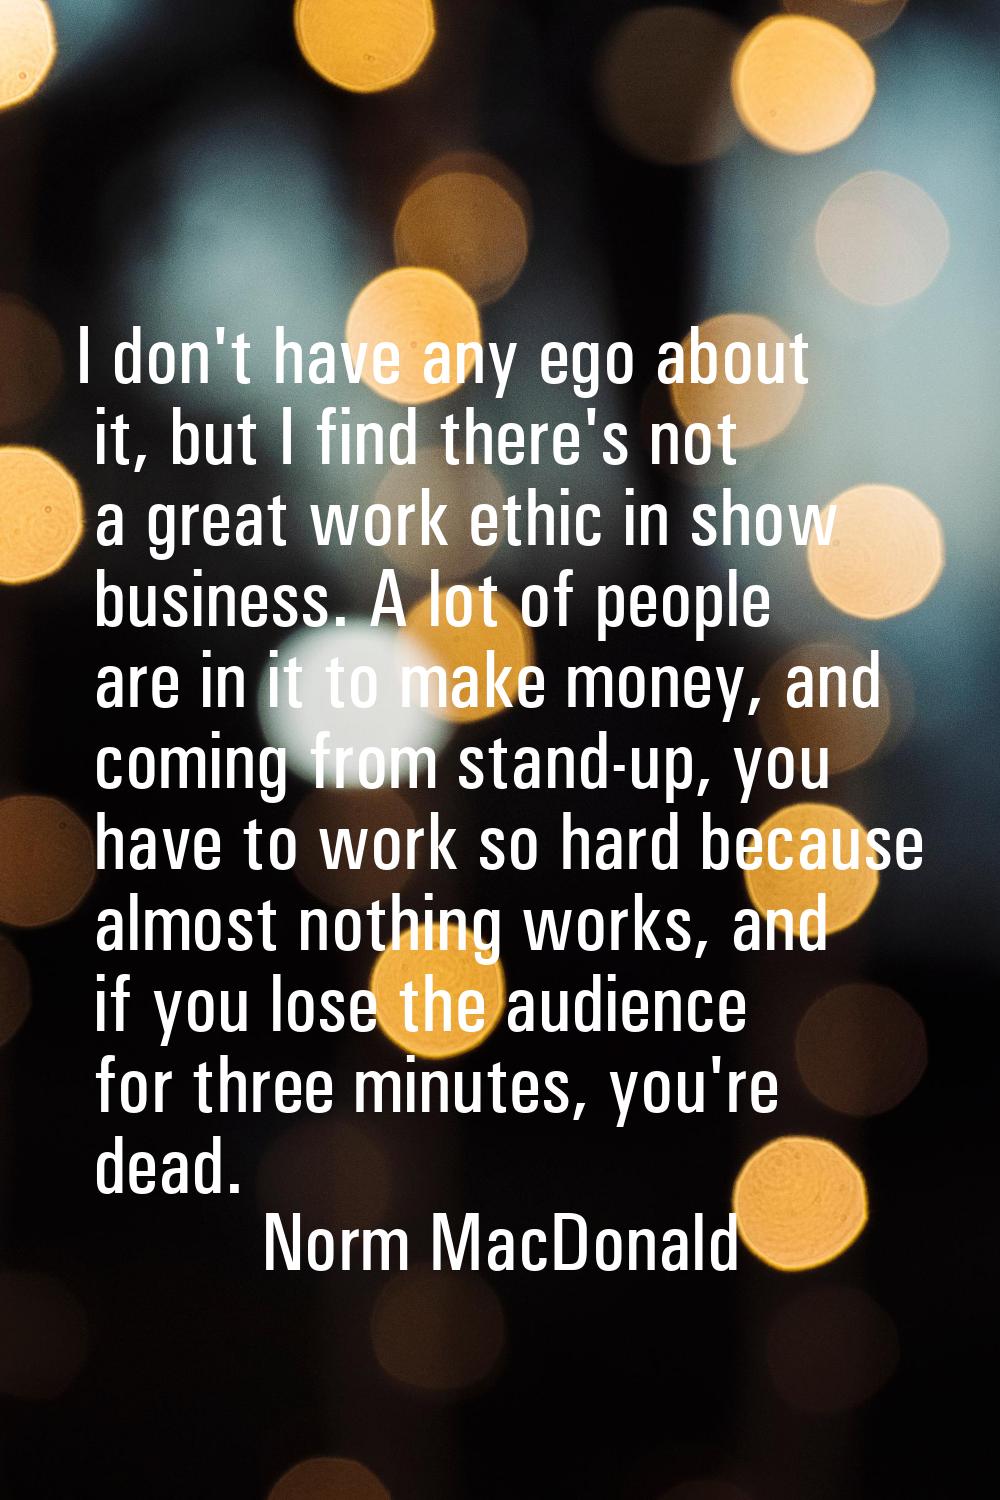 I don't have any ego about it, but I find there's not a great work ethic in show business. A lot of